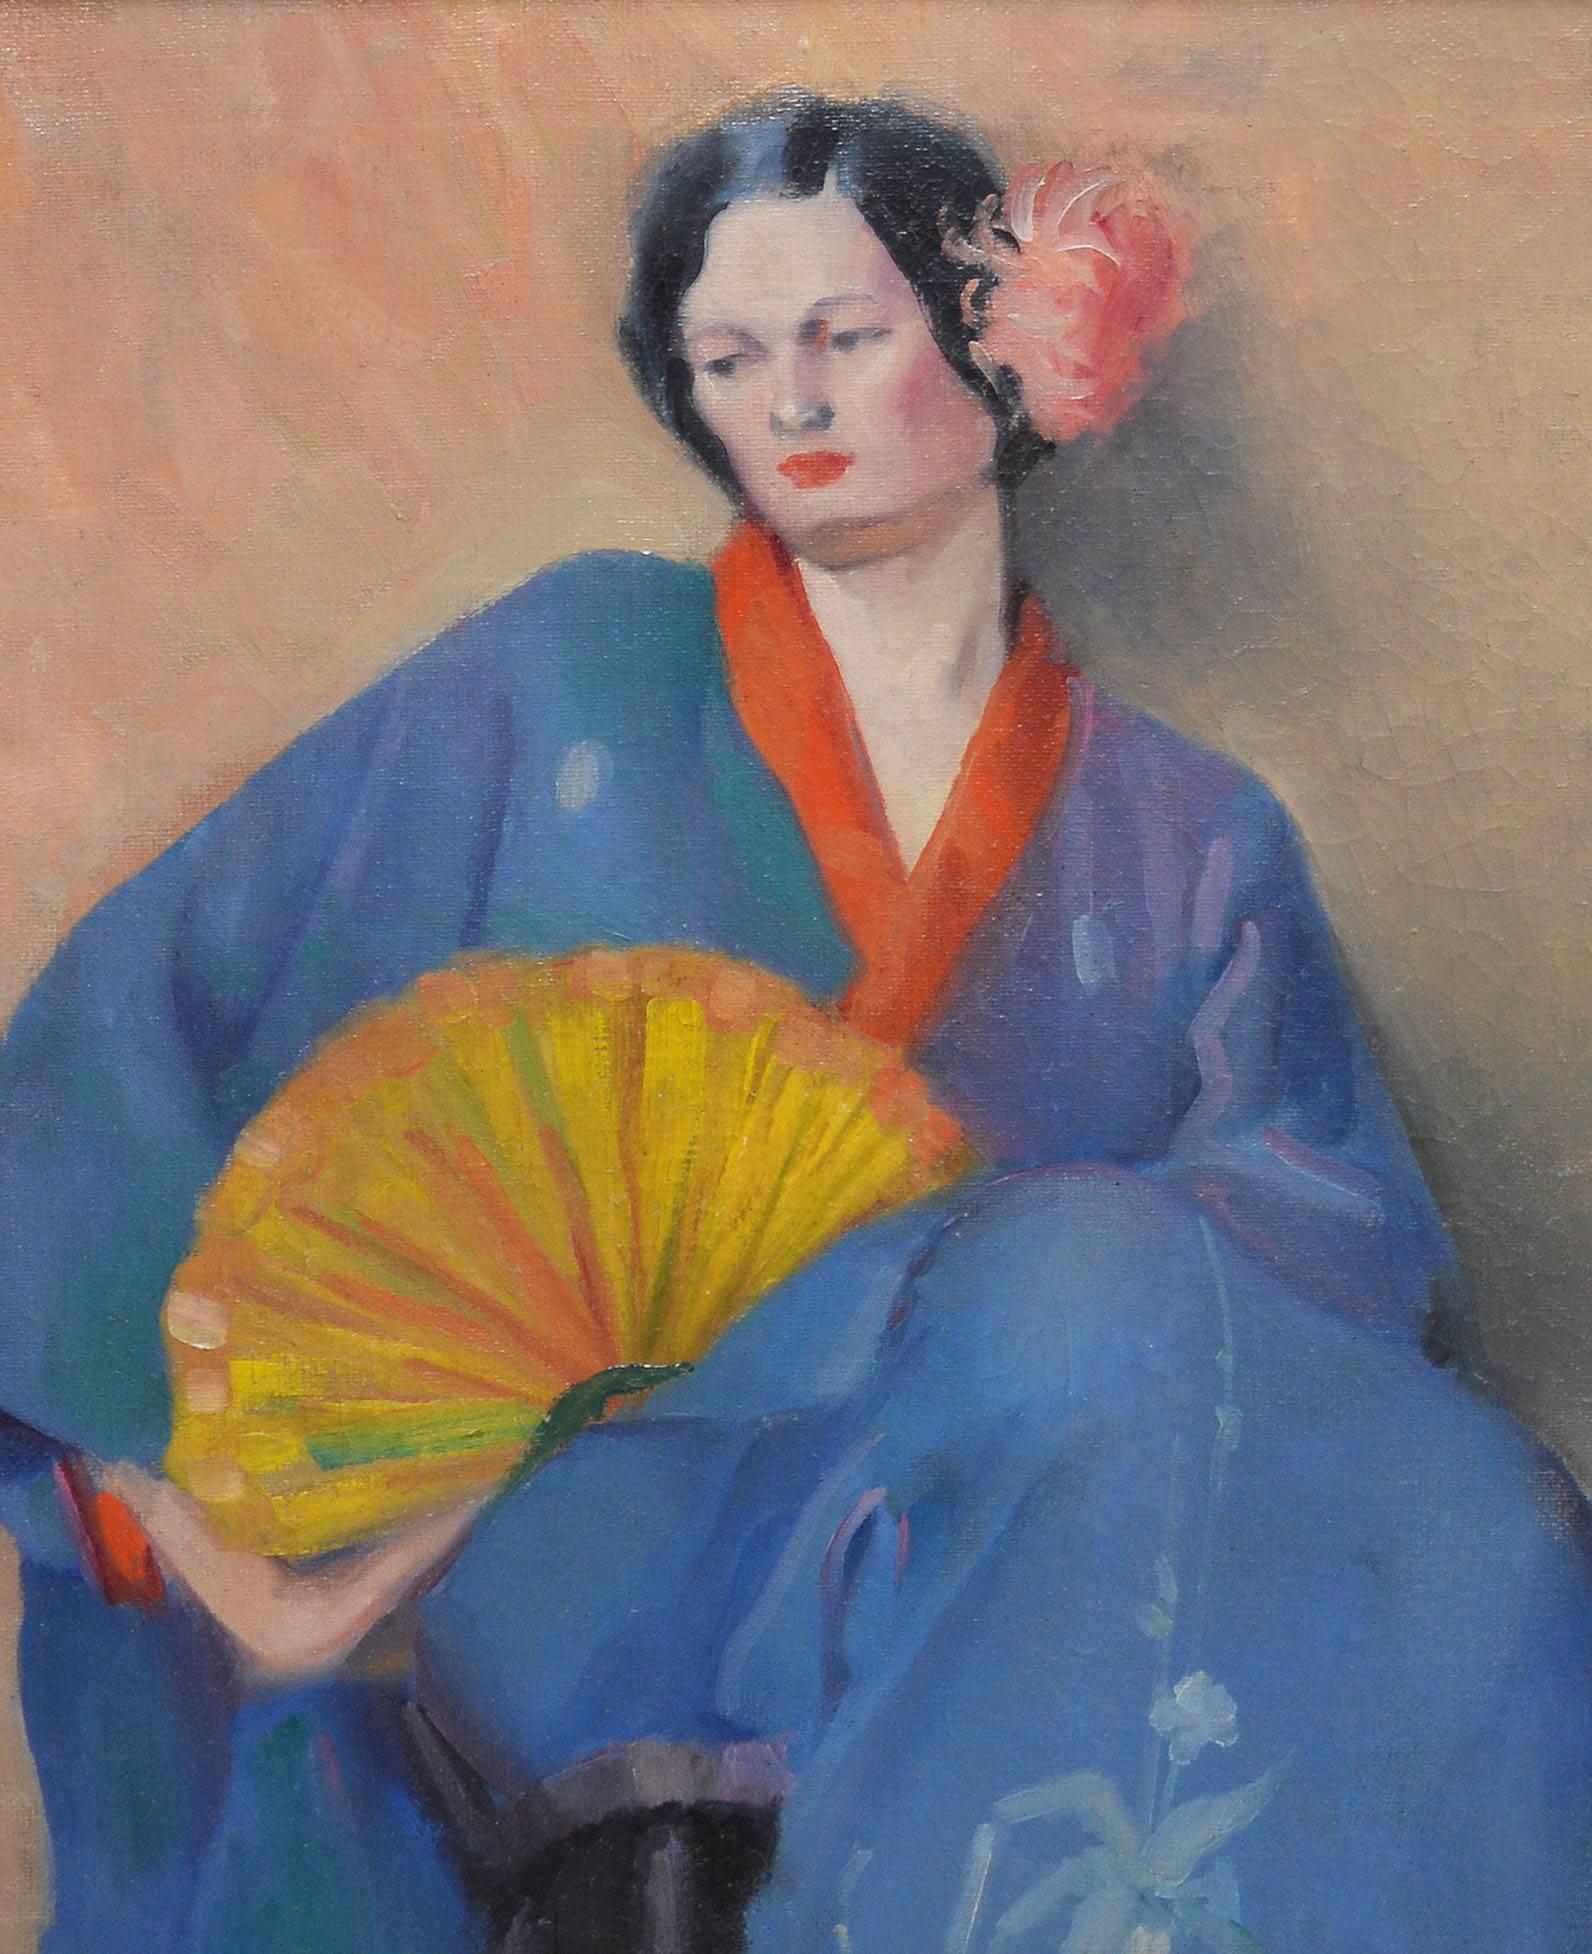 Portrait of a Woman in Japanese Clothes - Gray Portrait Painting by Unknown